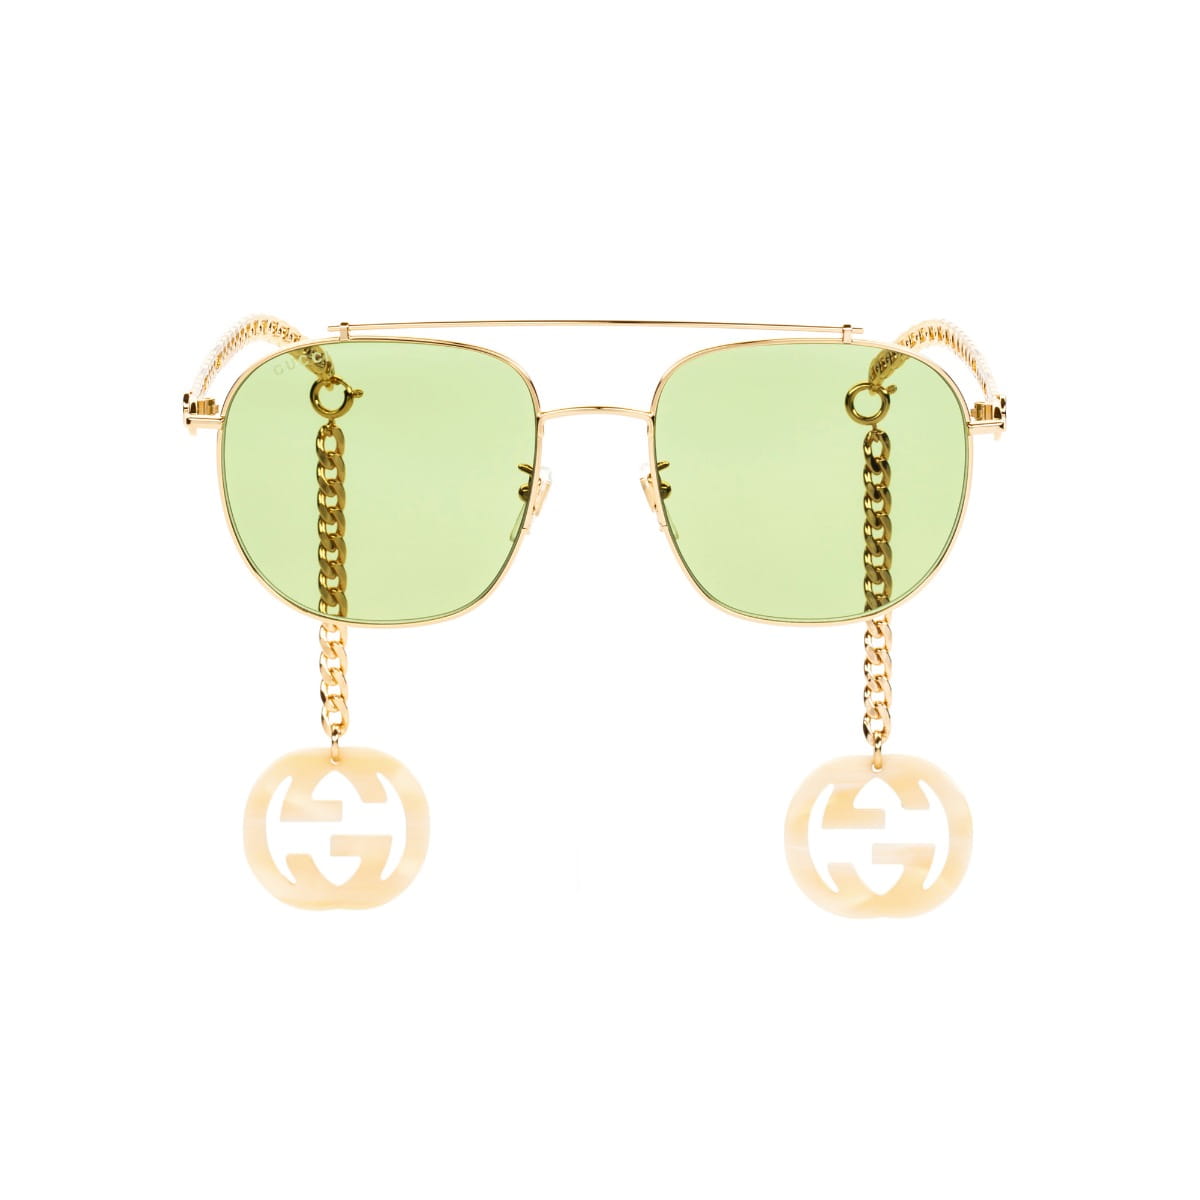 GUCCI SUNGLASSES WITH CHARMS COLLECTION